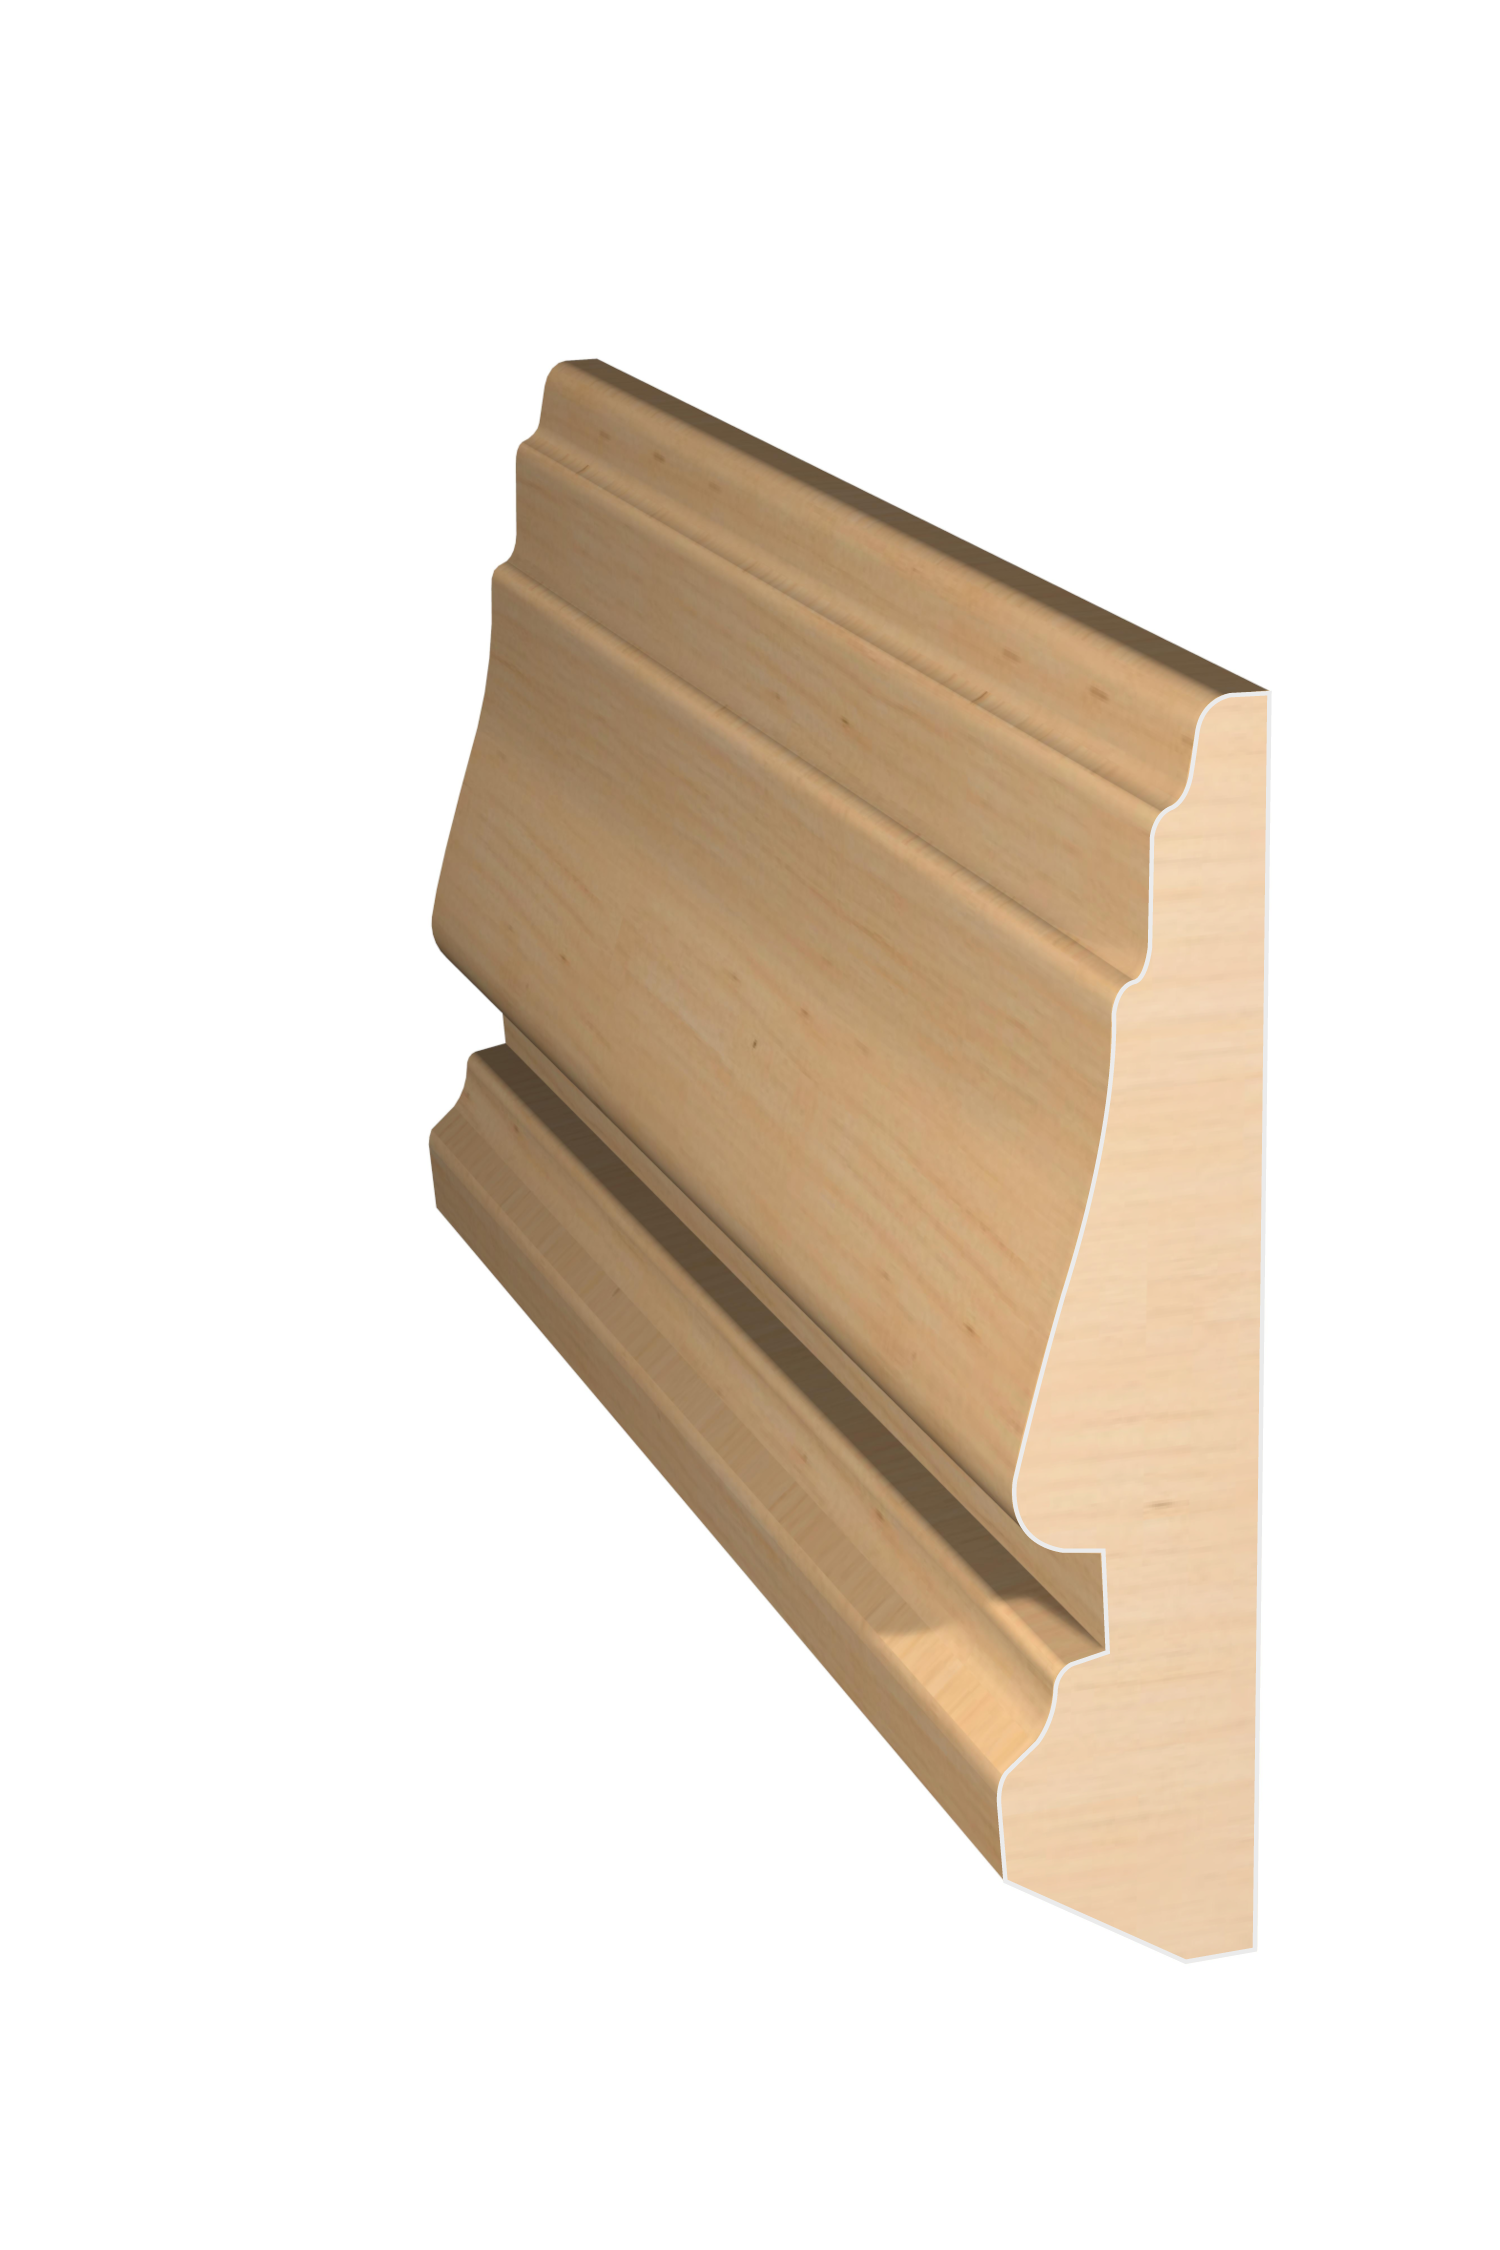 Three dimensional rendering of custom casing wood molding CAPL31253 made by Public Lumber Company in Detroit.